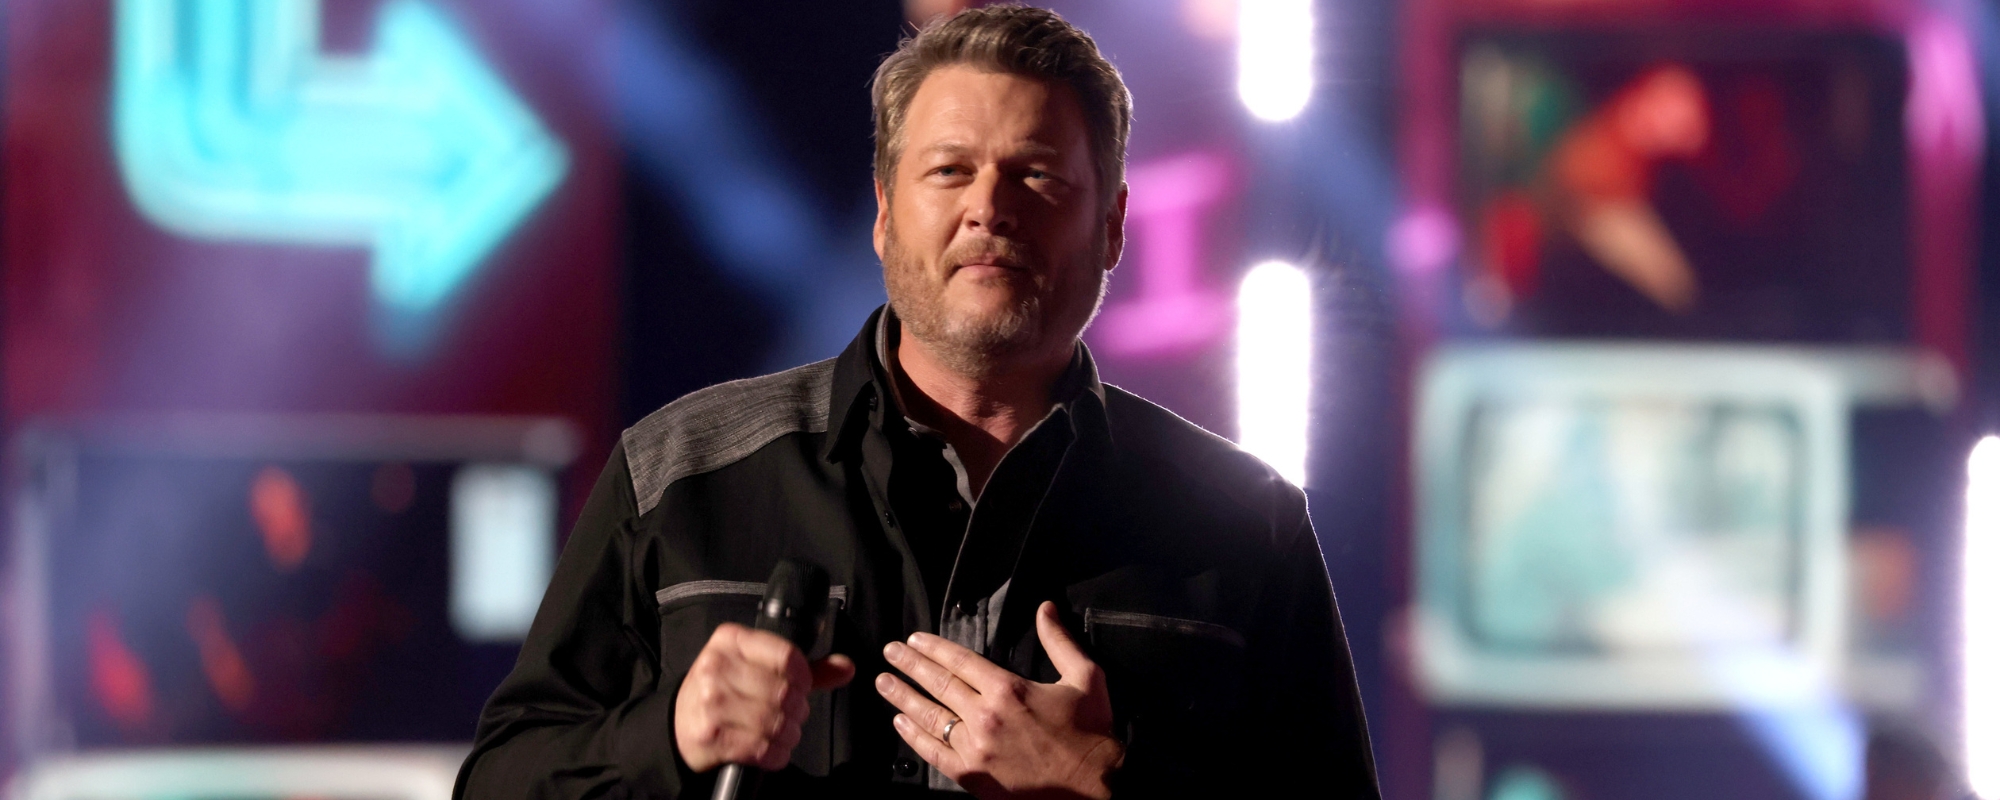 Blake Shelton Takes Strong Stance on Putting Up Christmas Decorations Before Thanksgiving